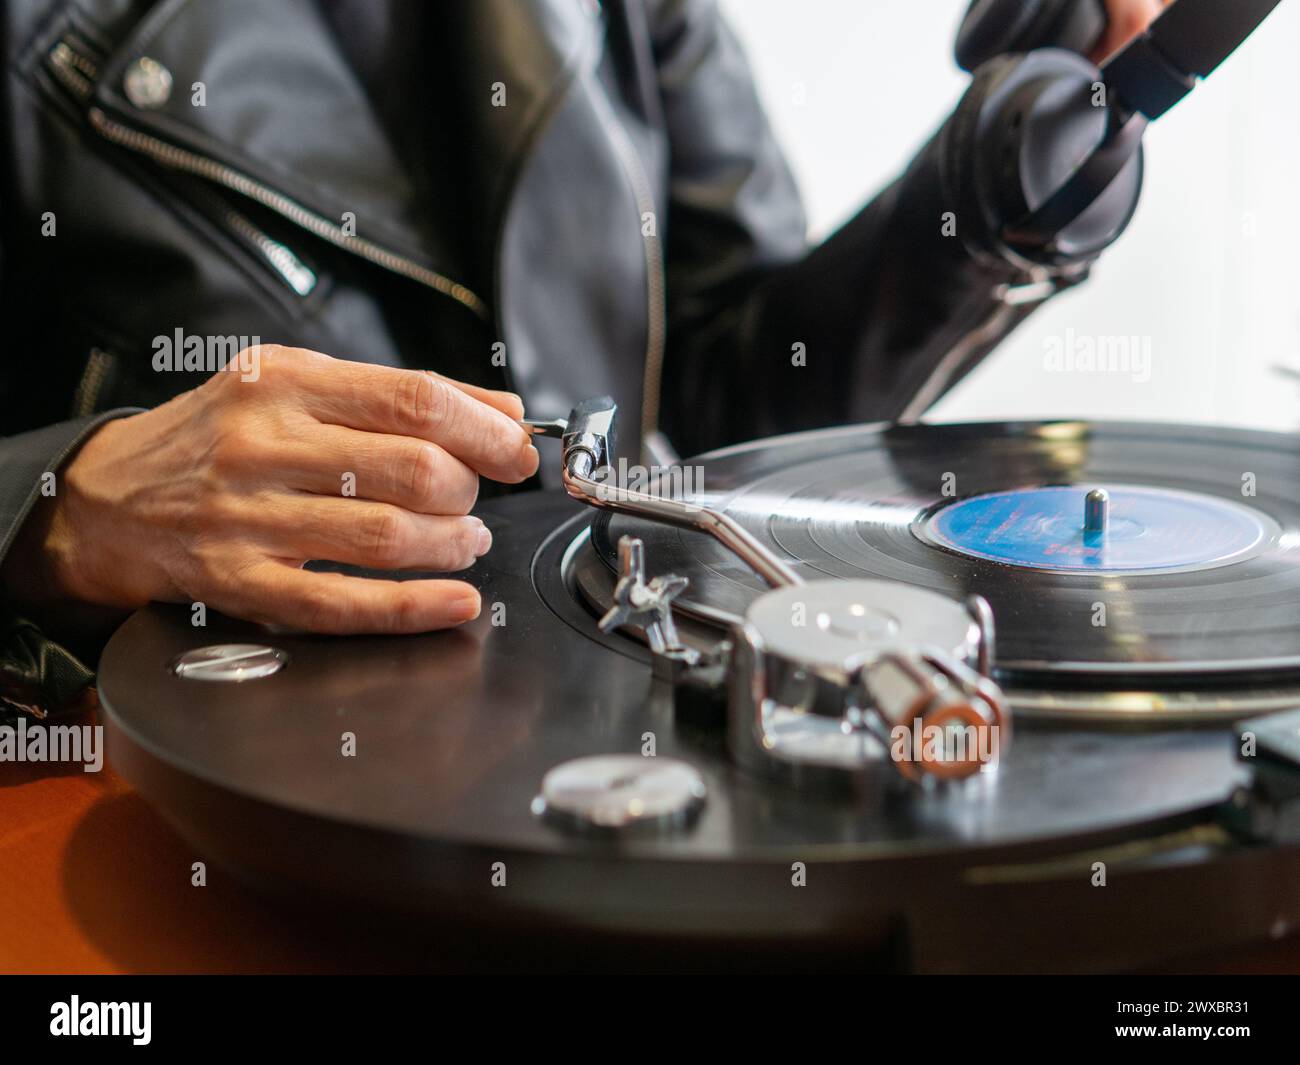 Lady hand holding the tonearm of her turntable ready to play a vinyl record Stock Photo